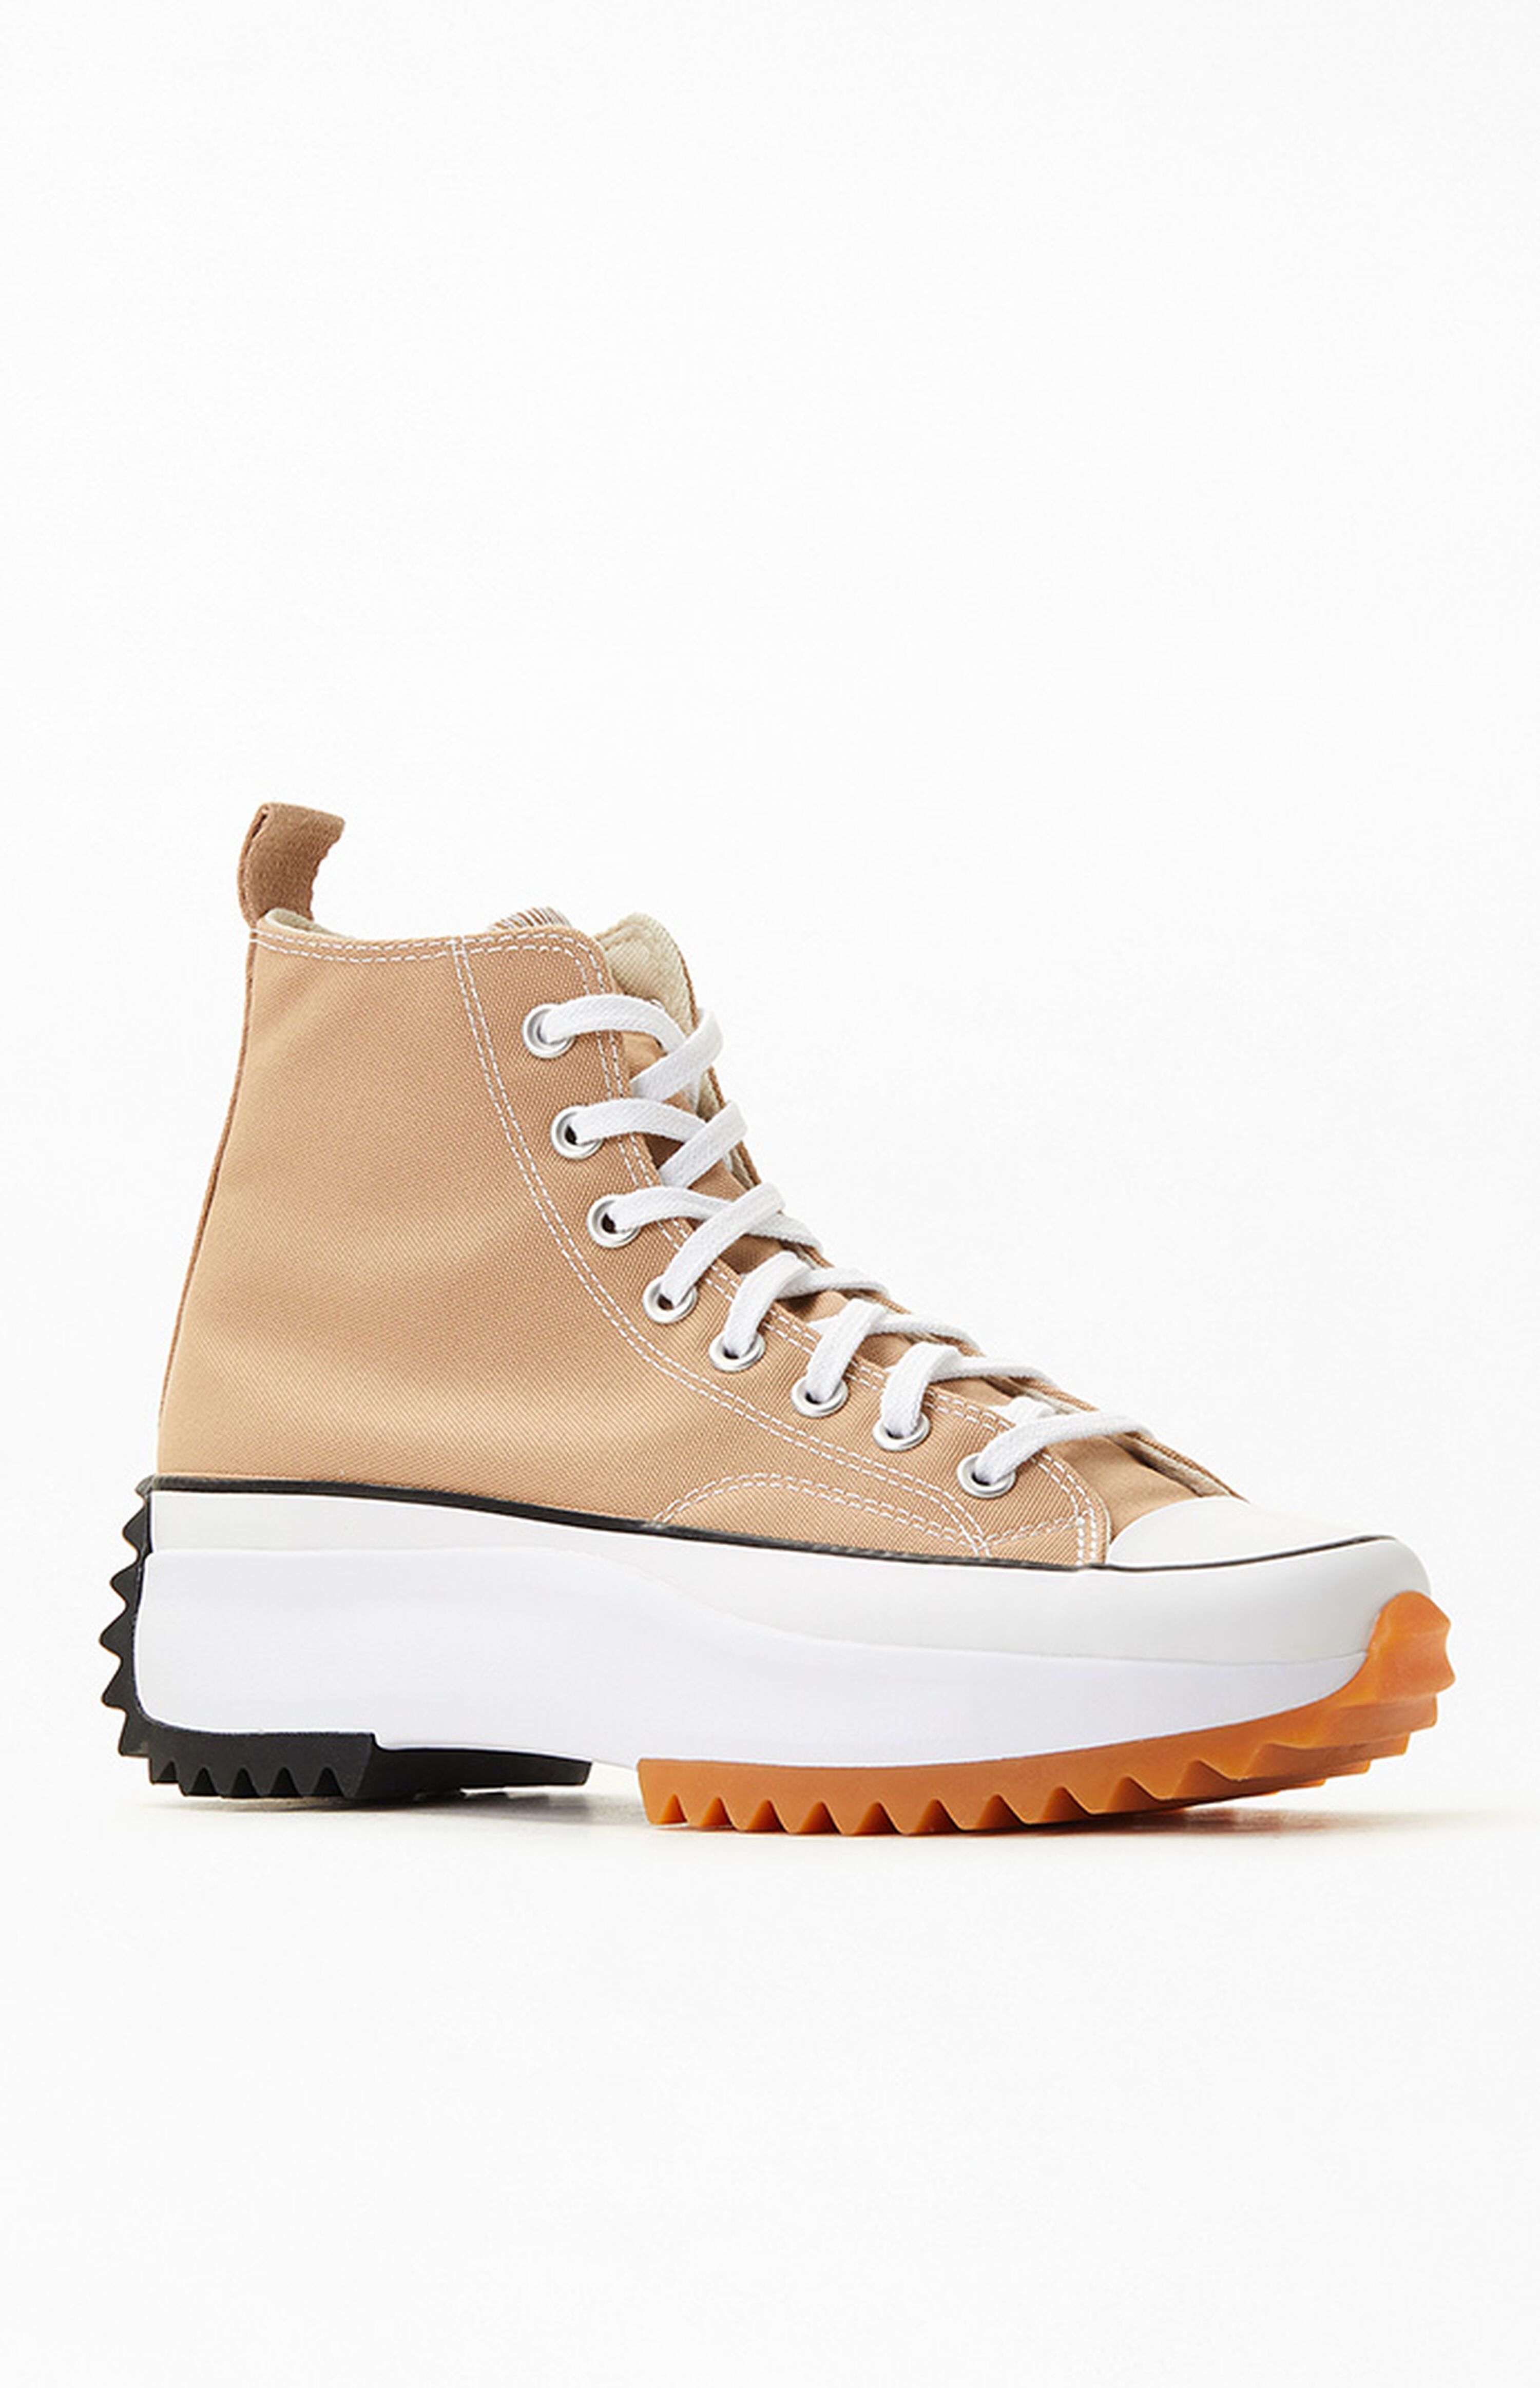 Converse Recycled Beige Run Star Hike Platform High Top Sneakers | PacSun | PacSun